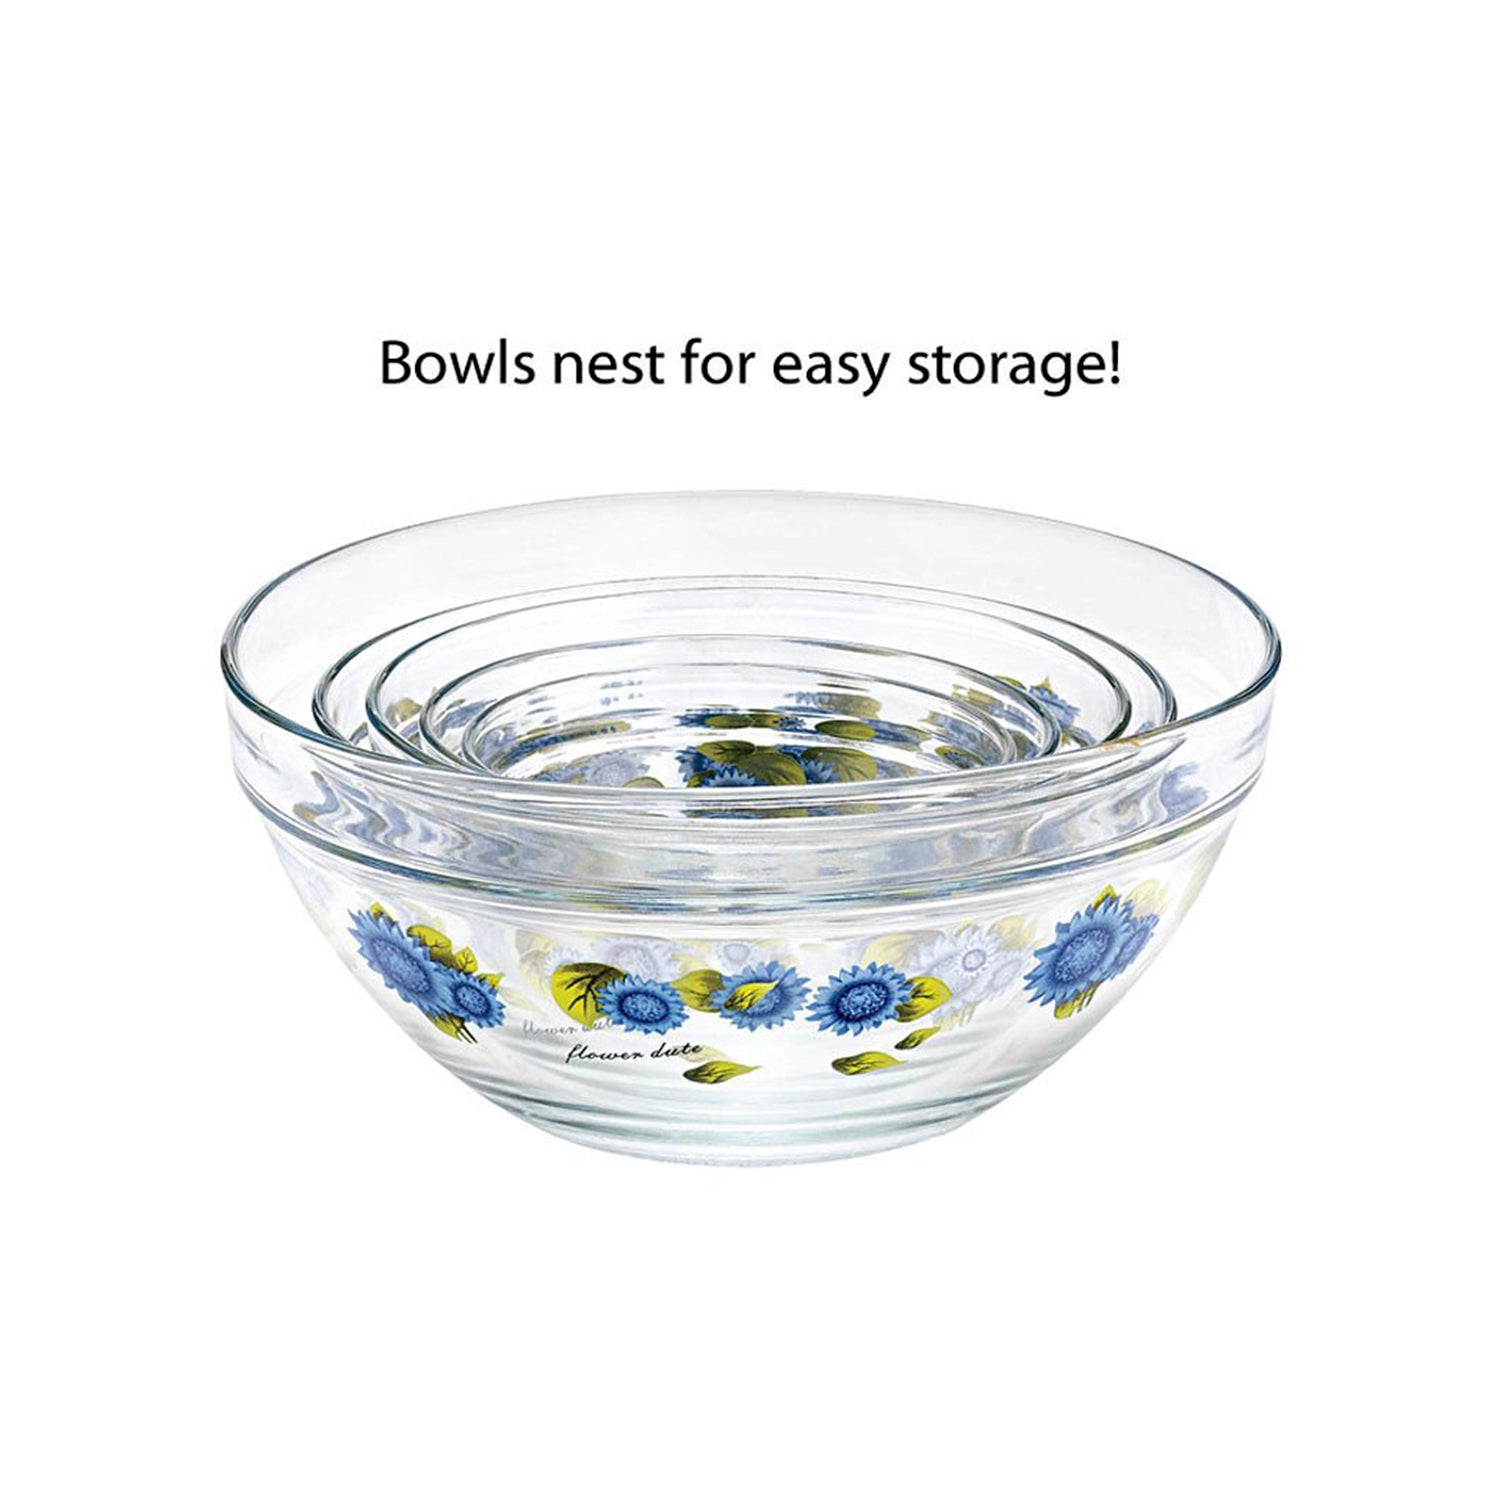 10 Pcs Glass Lunch Bowls Food Storage Containers Set With Lids & Flower Design